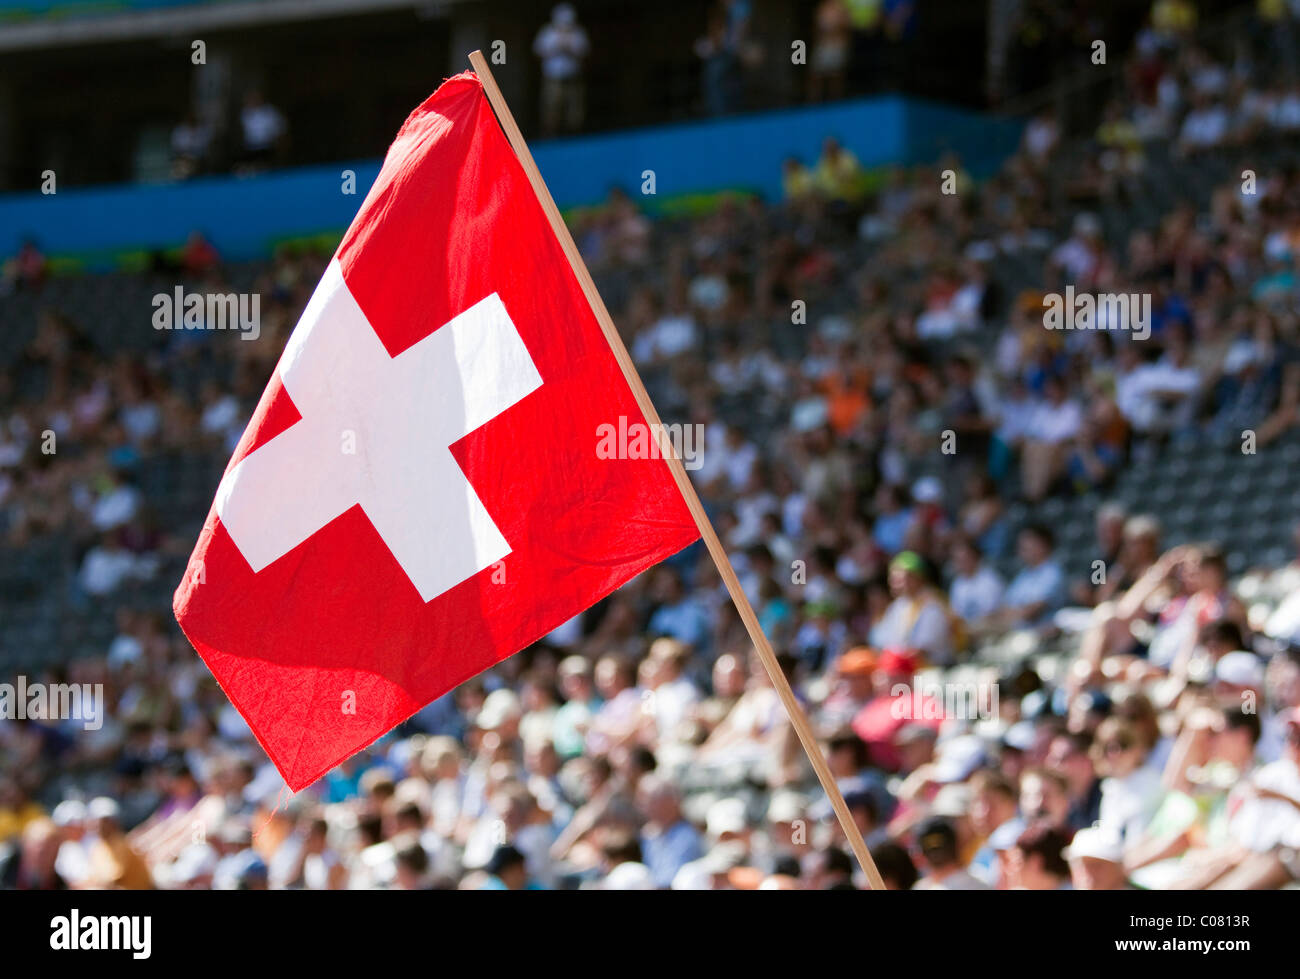 Swiss fan waving the national flag at a sports event Stock Photo